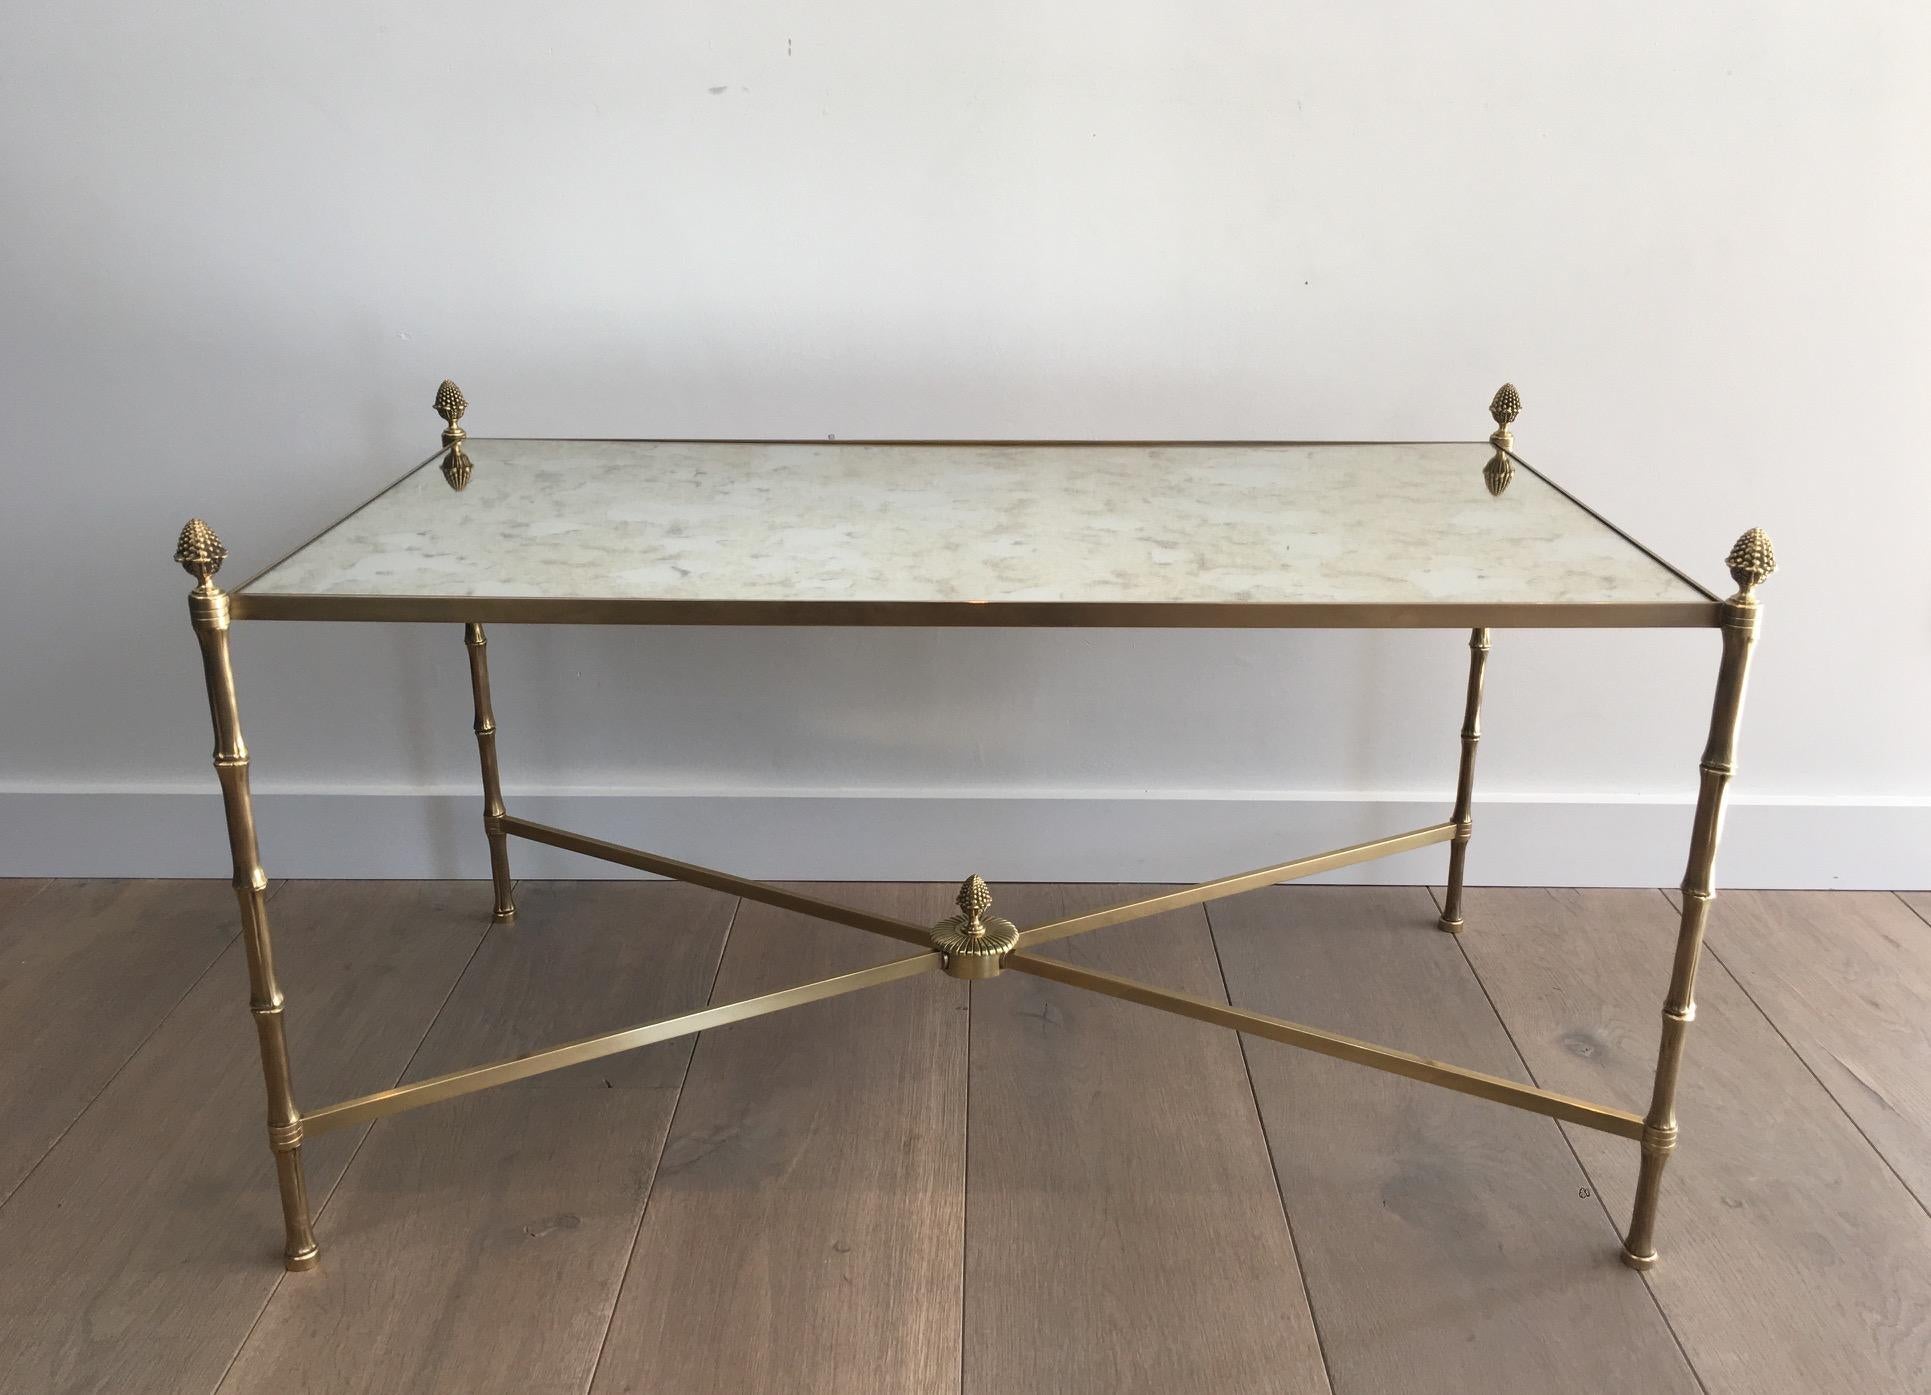 This neoclassical coffee table is made of bronze and brass with fine faux-bamboo feet and nice finials on each corner that we can find on the center of the stretcher as well. The shelf is made of a faux-antiques mirror in the style of the old